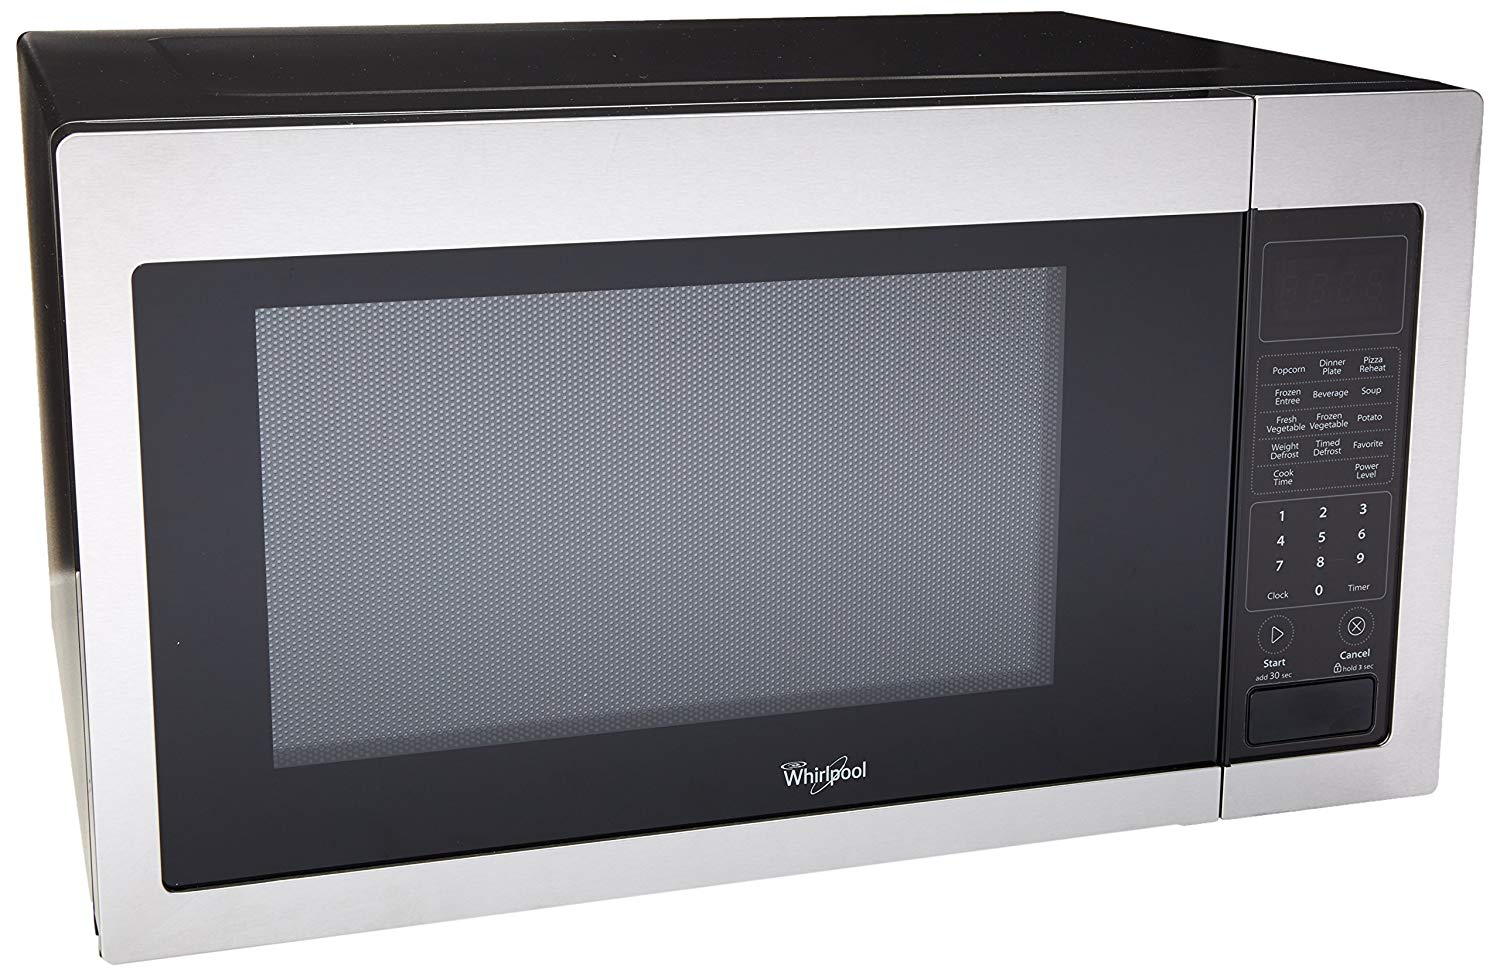 Whirlpool WMC30516HZ 1.6 cu Ft Stainless Steel Countertop Microwave Replacement Model For WMC30516AS